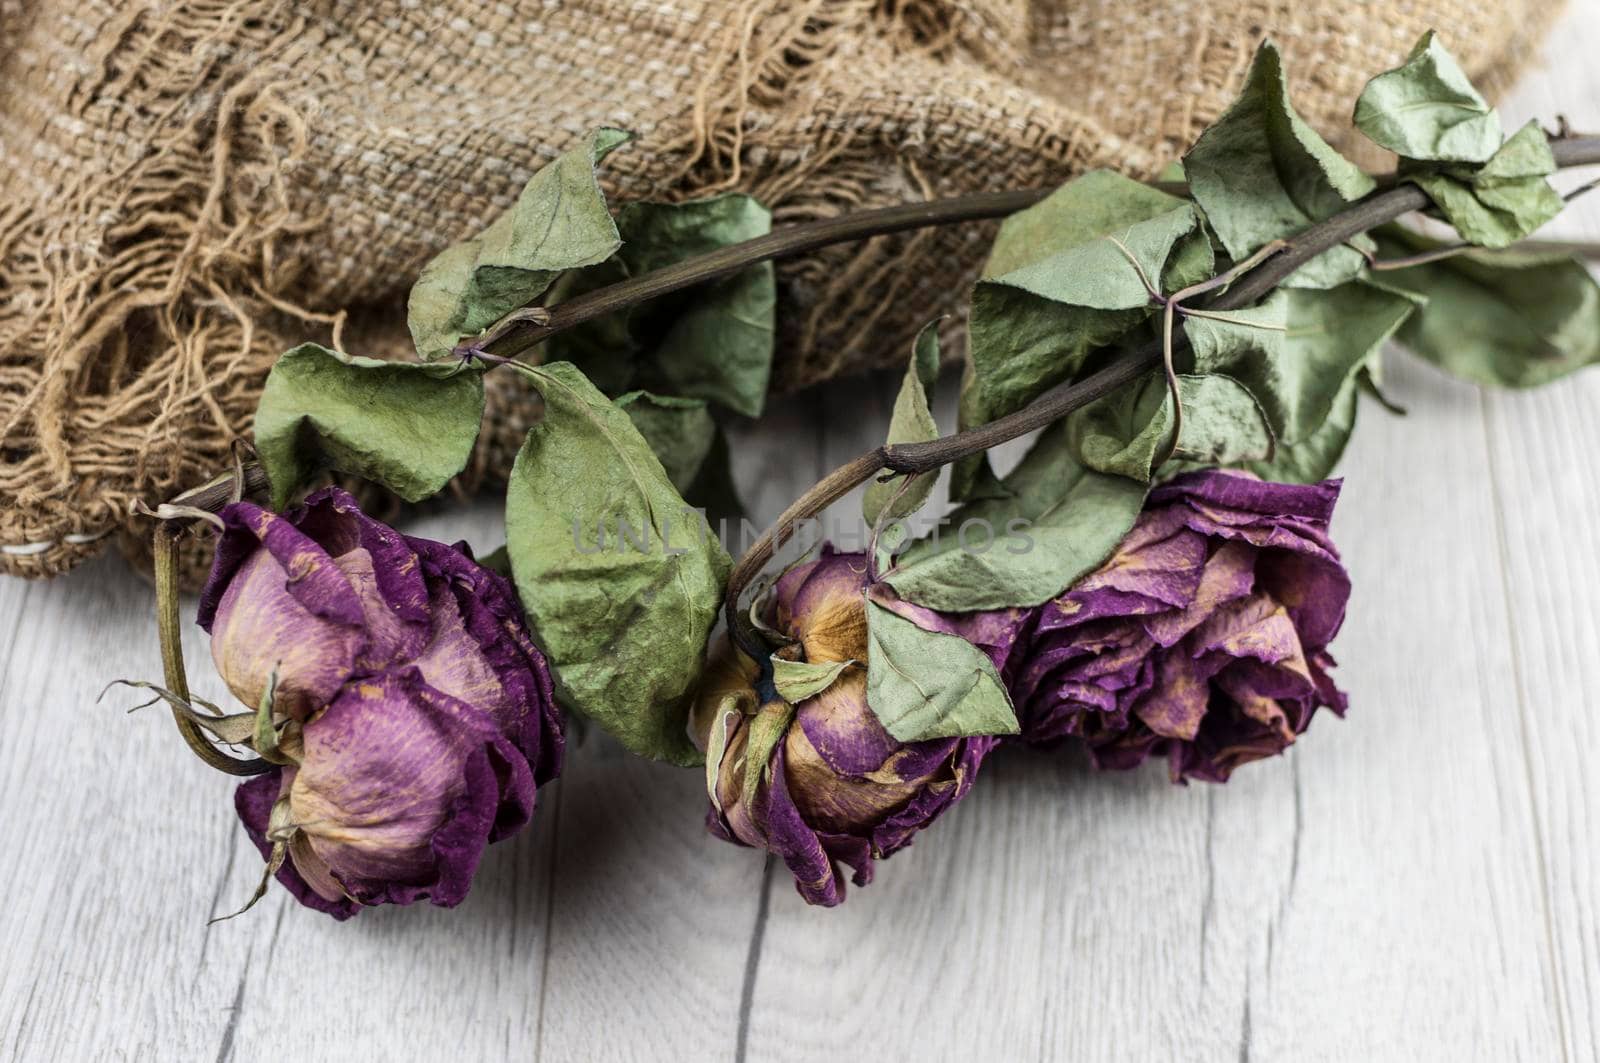 Abstract rose bouquet, Bouquet of dried flowers with old burlap texture on wooden table